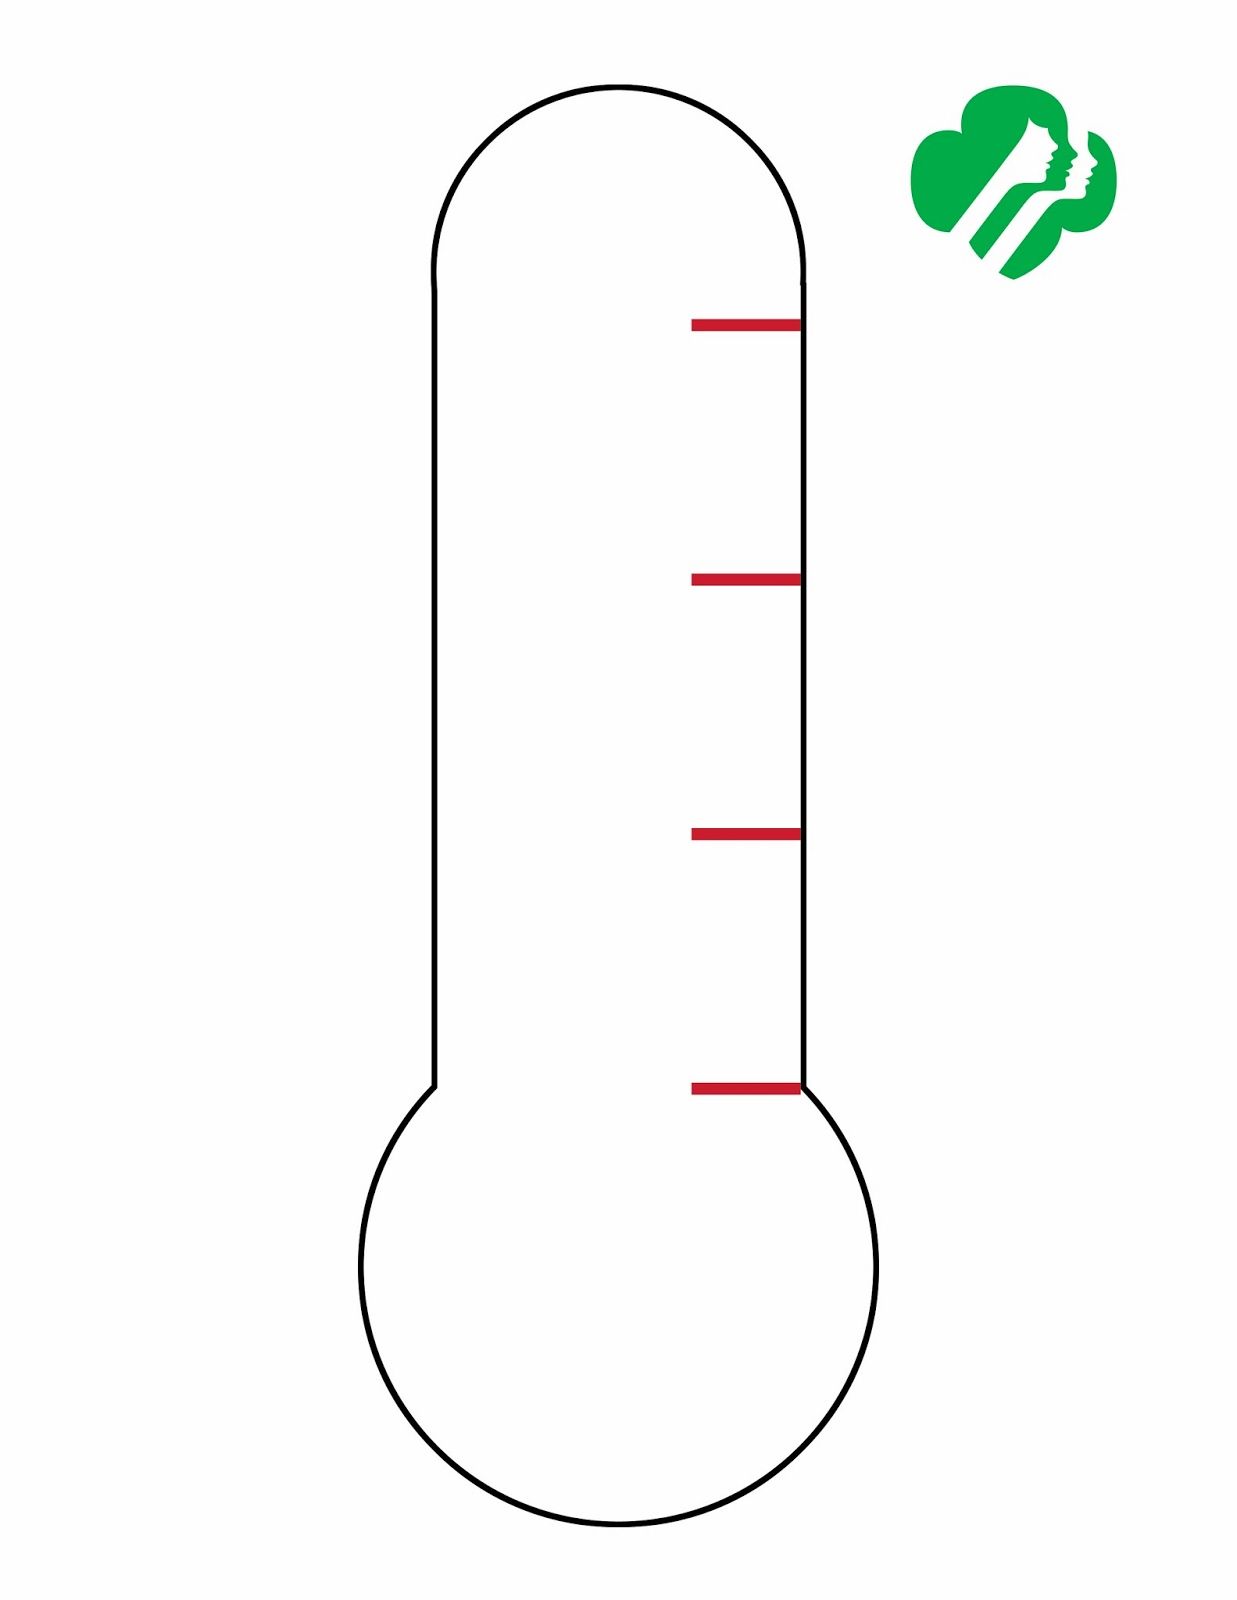 Goal thermometer template.